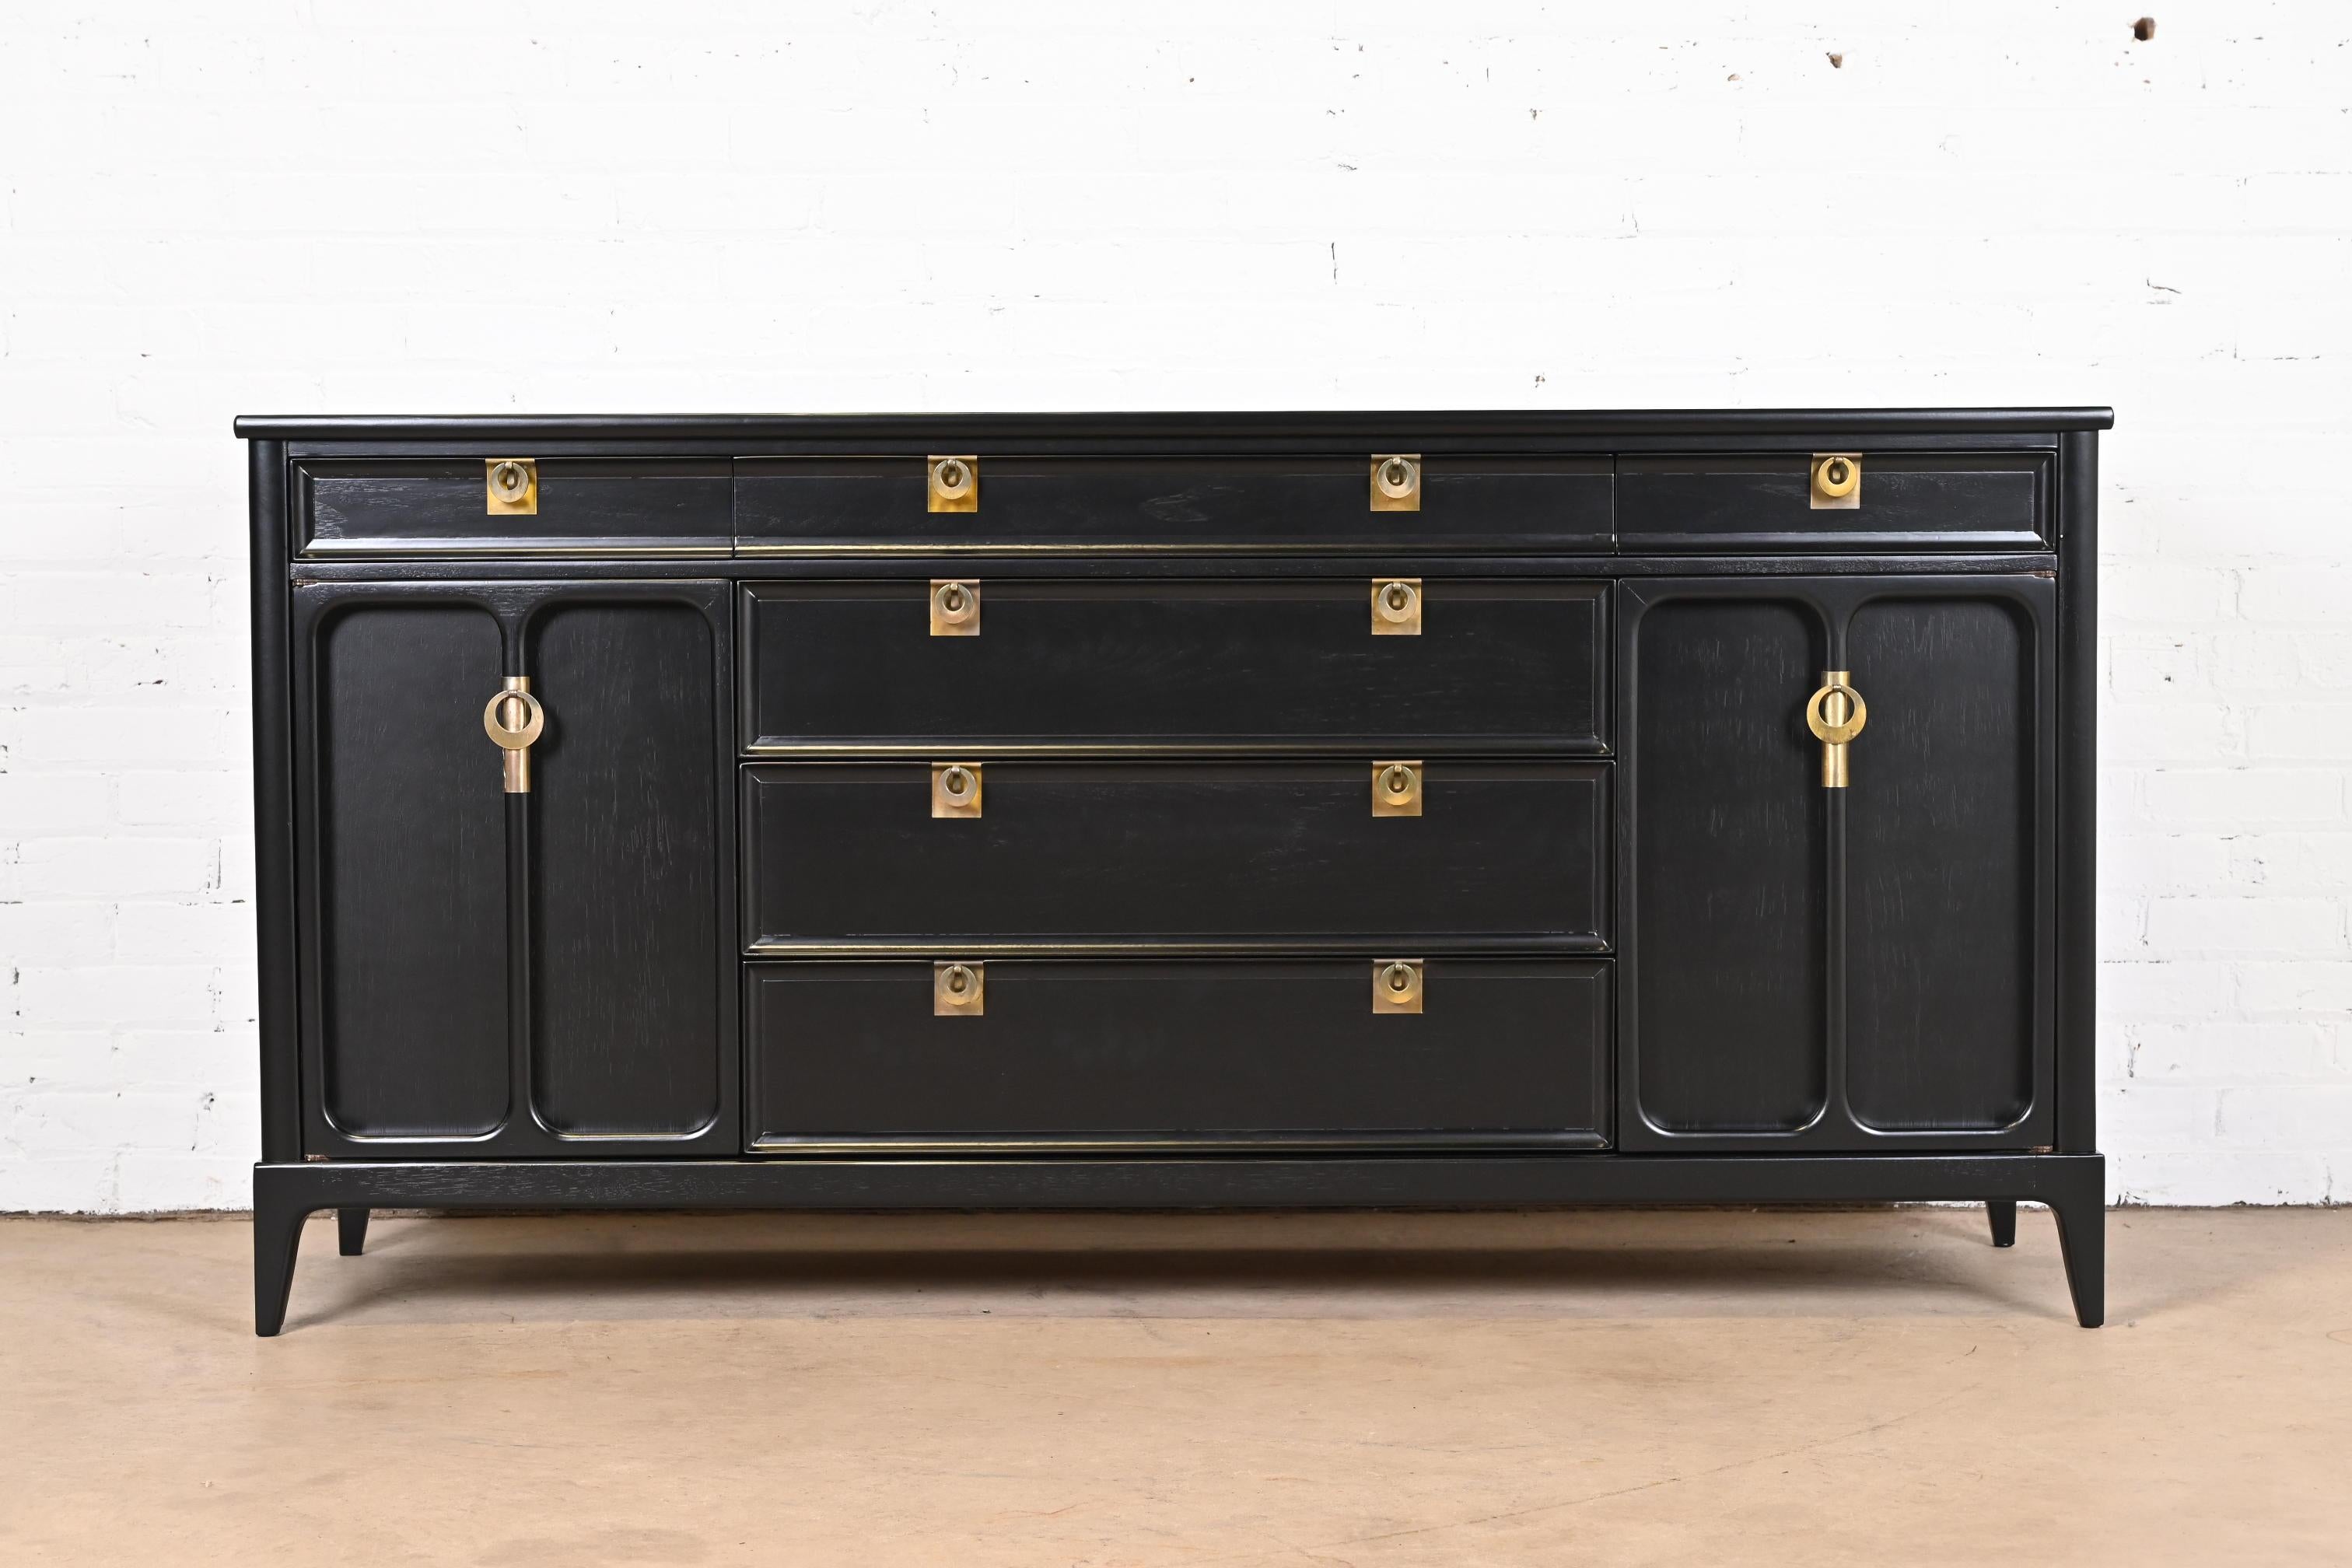 American Mid-Century Modern Black Lacquered Sideboard by White Furniture, Refinished